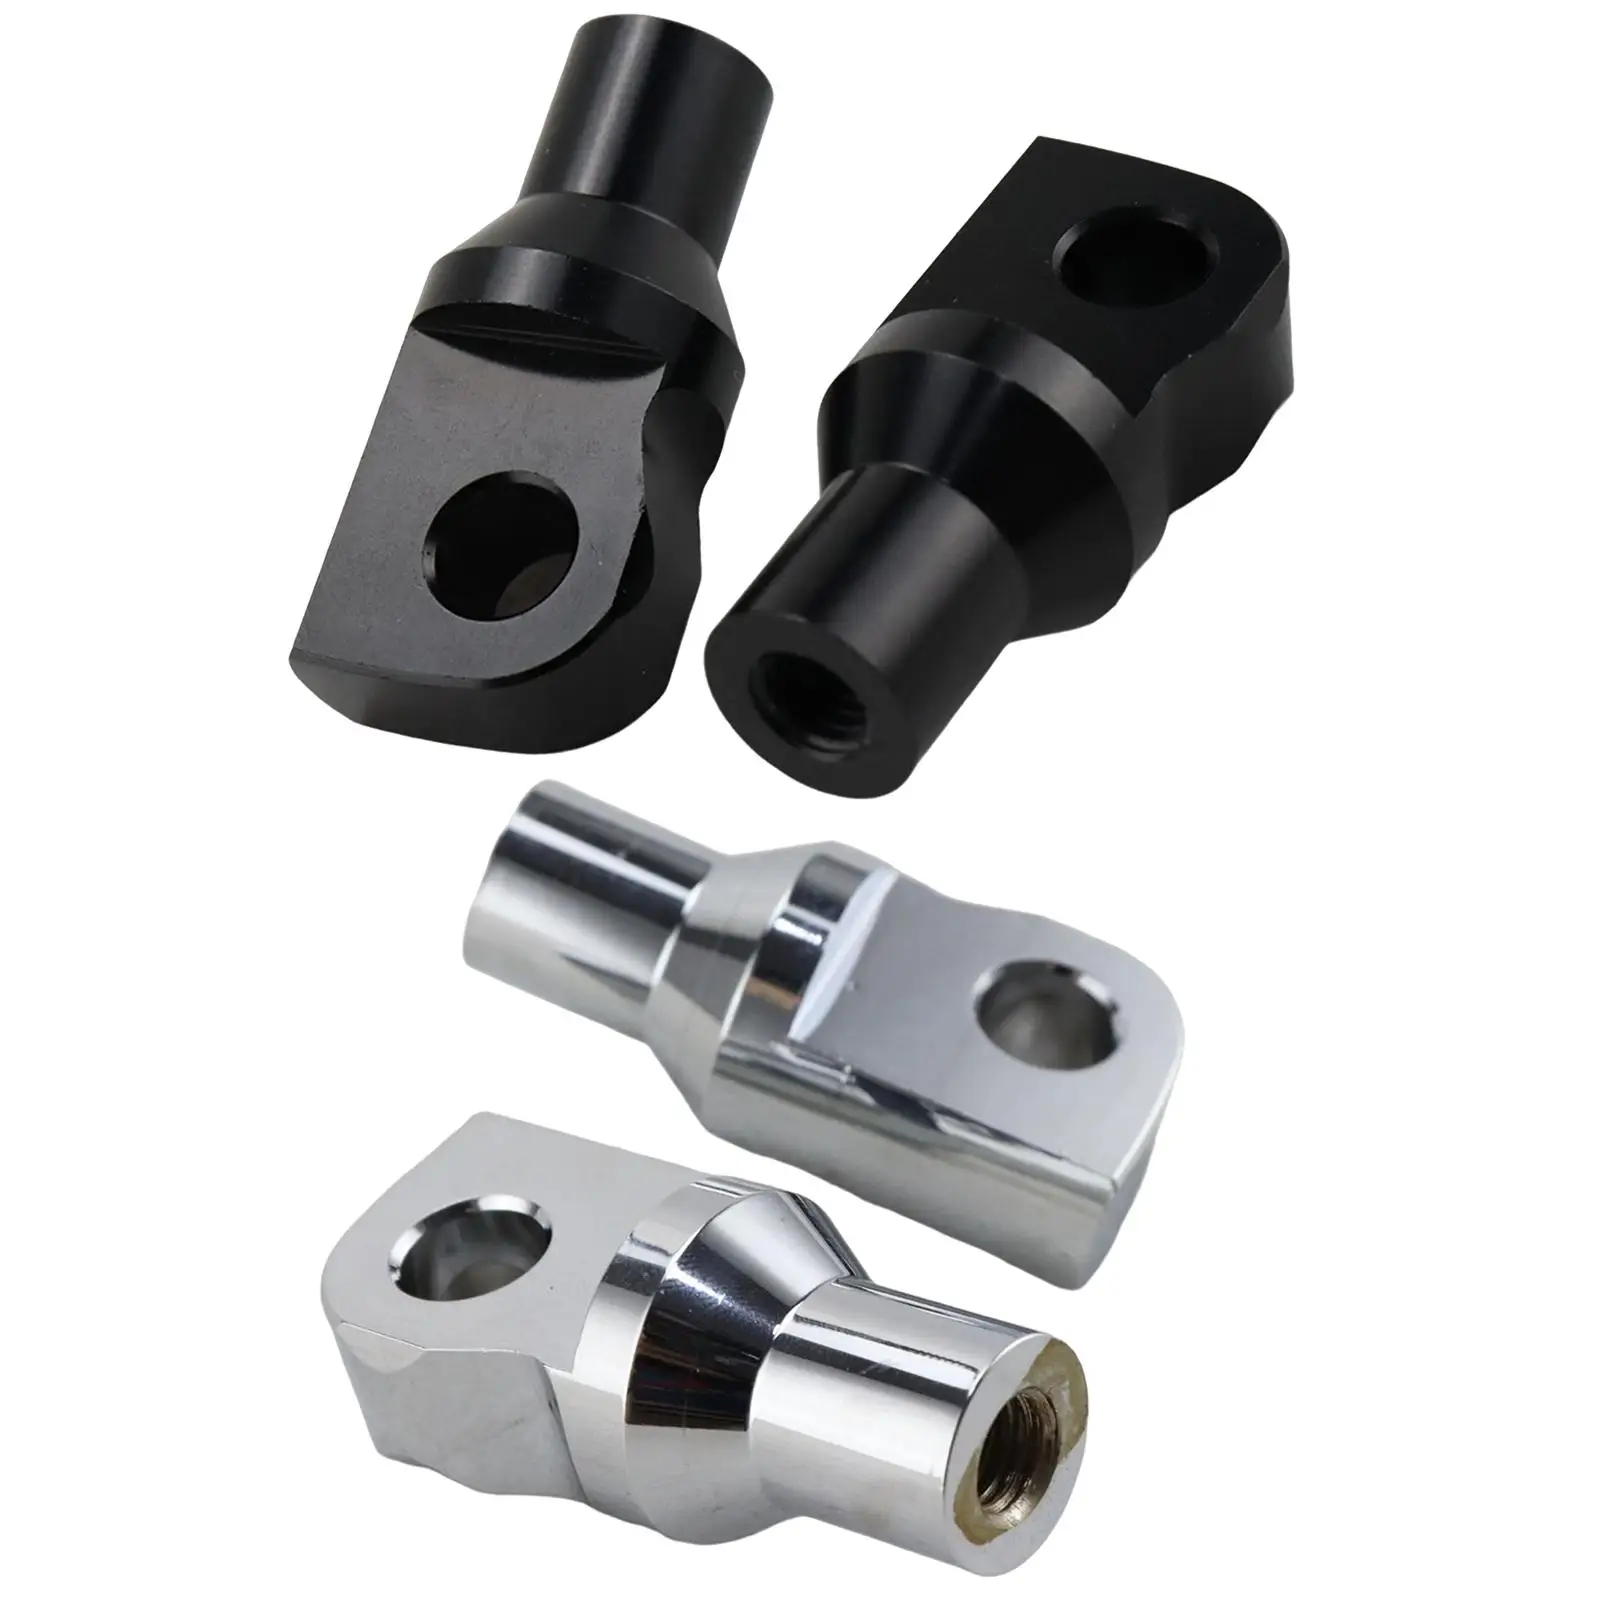 2 Pieces Foot Pegs Mounting Bolts Adapter for Male Pegs Mounting